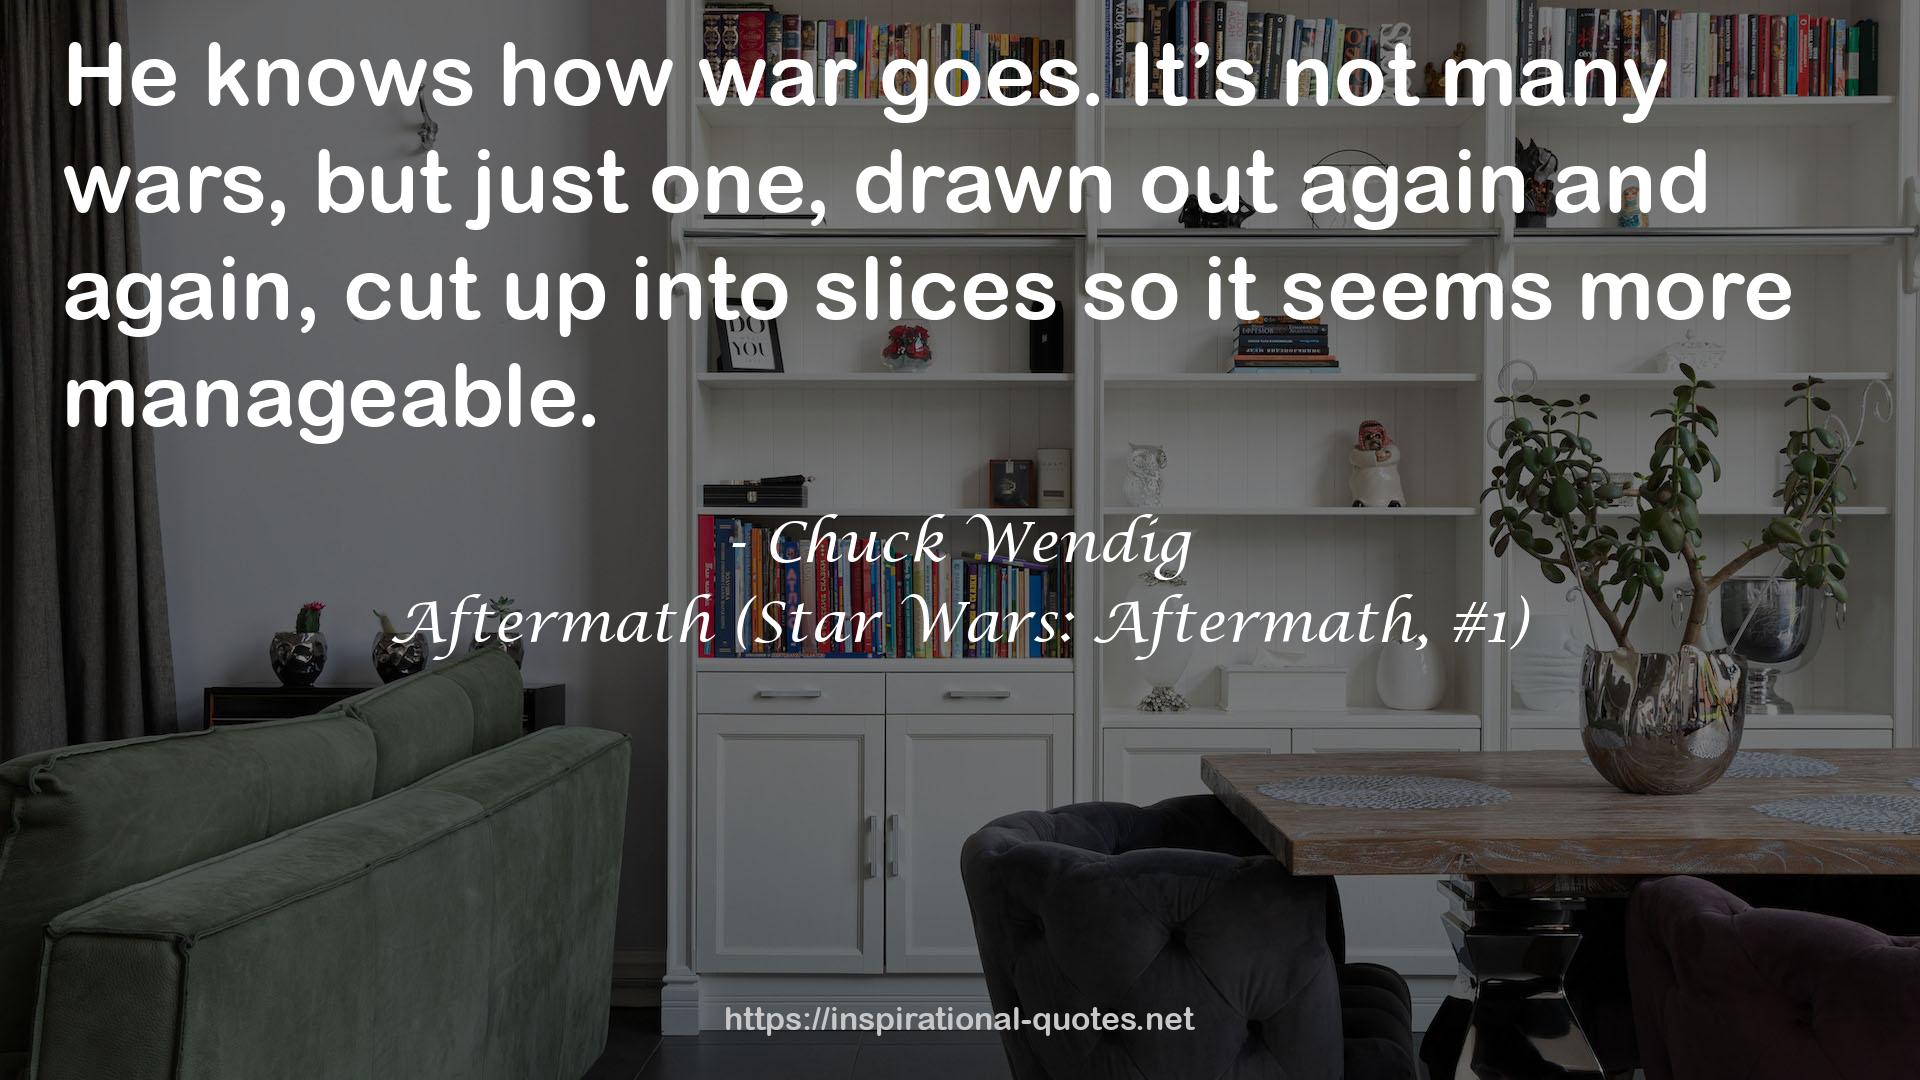 Aftermath (Star Wars: Aftermath, #1) QUOTES